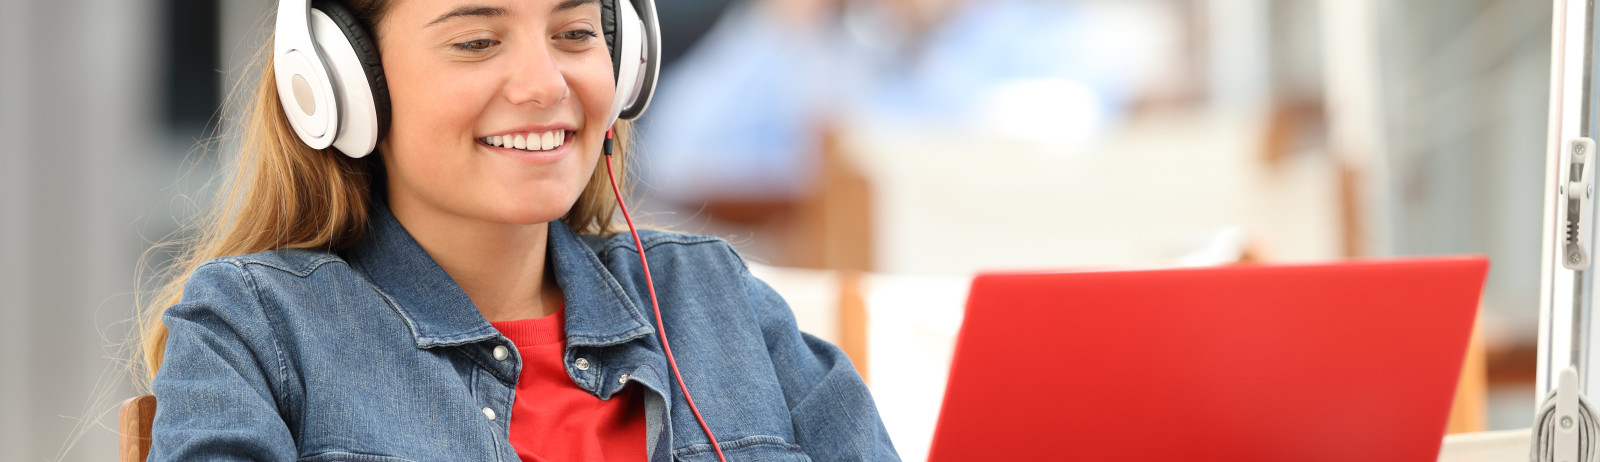 Female IELTS test taker wearing a blue denim jacket and a headphone, prepares for computer-delivered IELTS in her laptop.